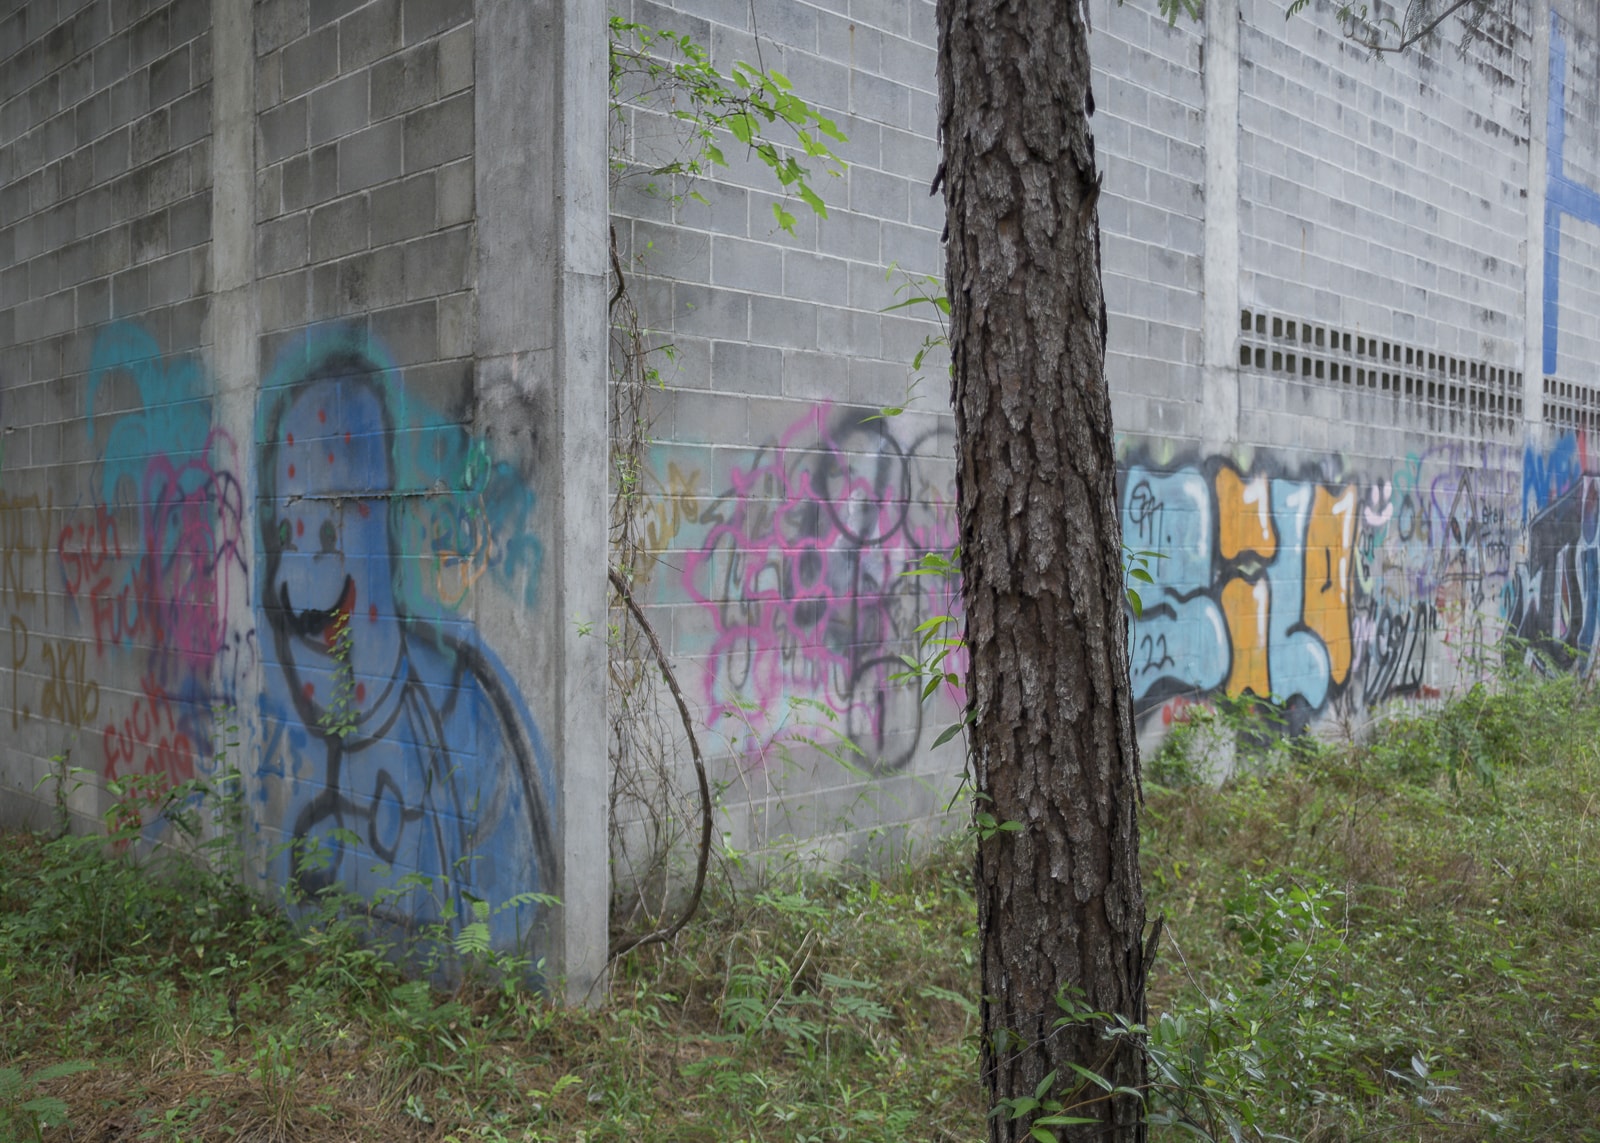 Urbex Of An Abandoned Warehouse In A Florida Pine Forest